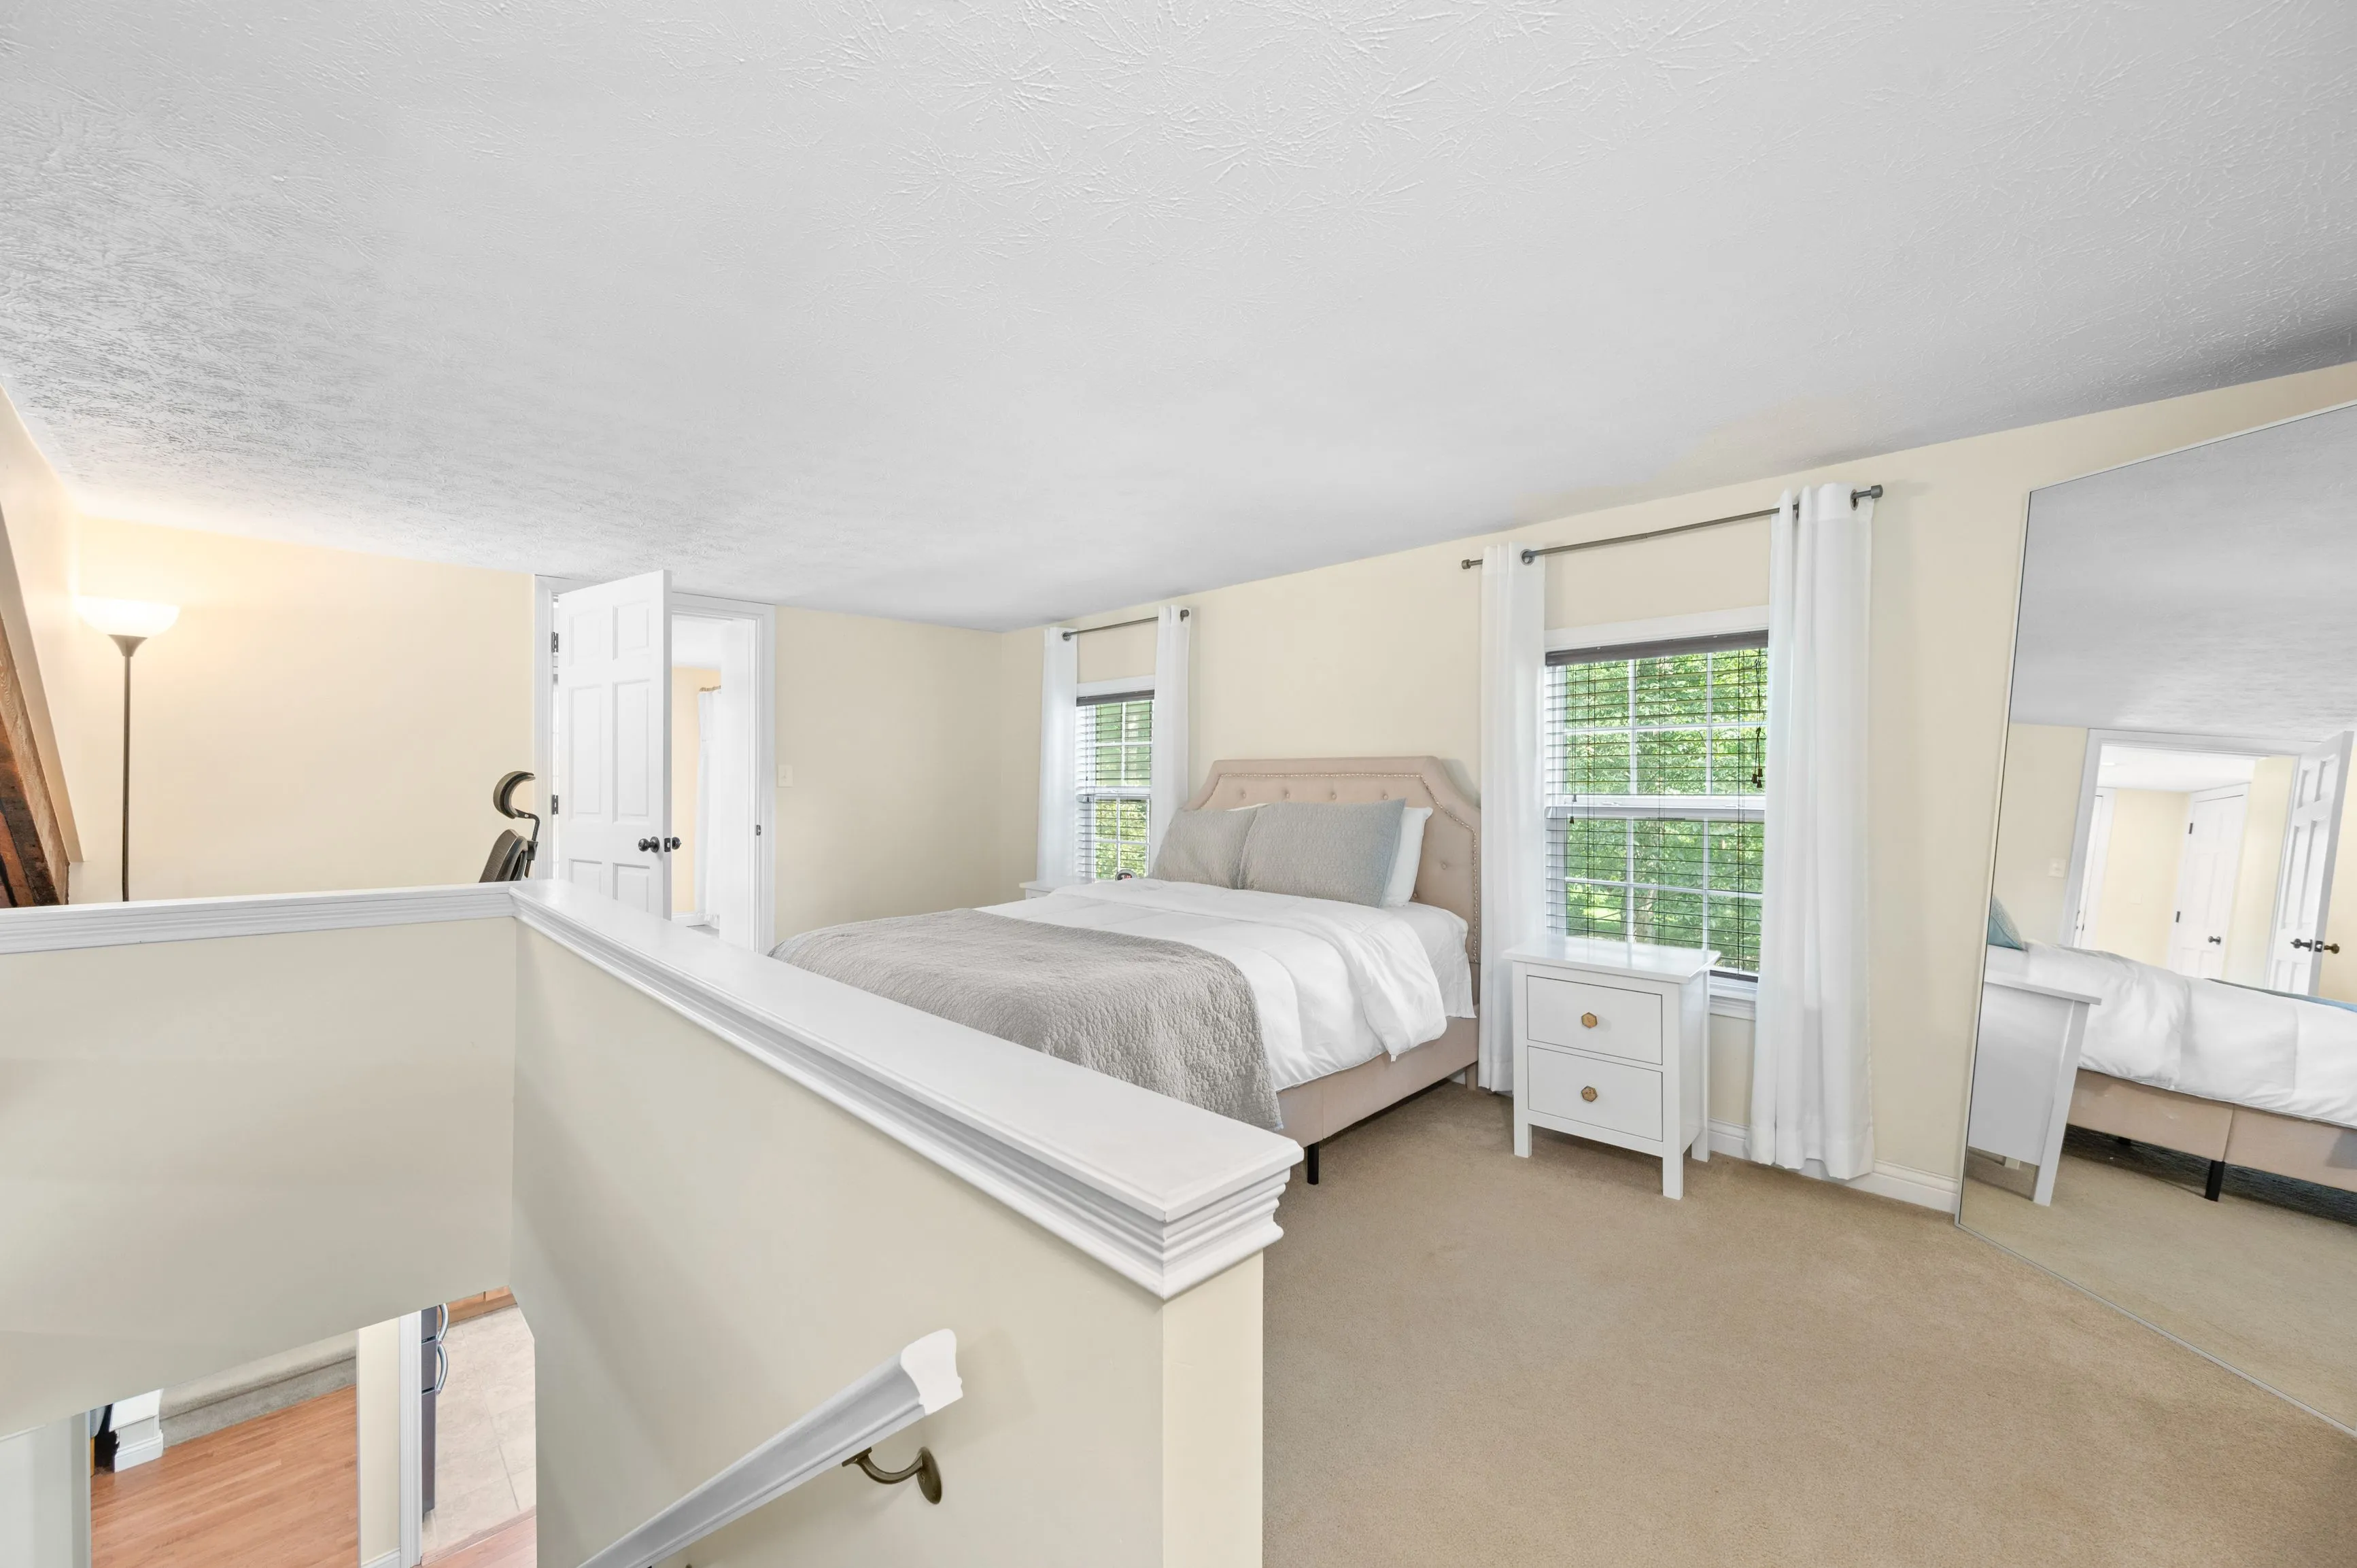 Bright and airy bedroom interior with queen-sized bed, white linens, double windows, and an open door leading to an adjoining room.